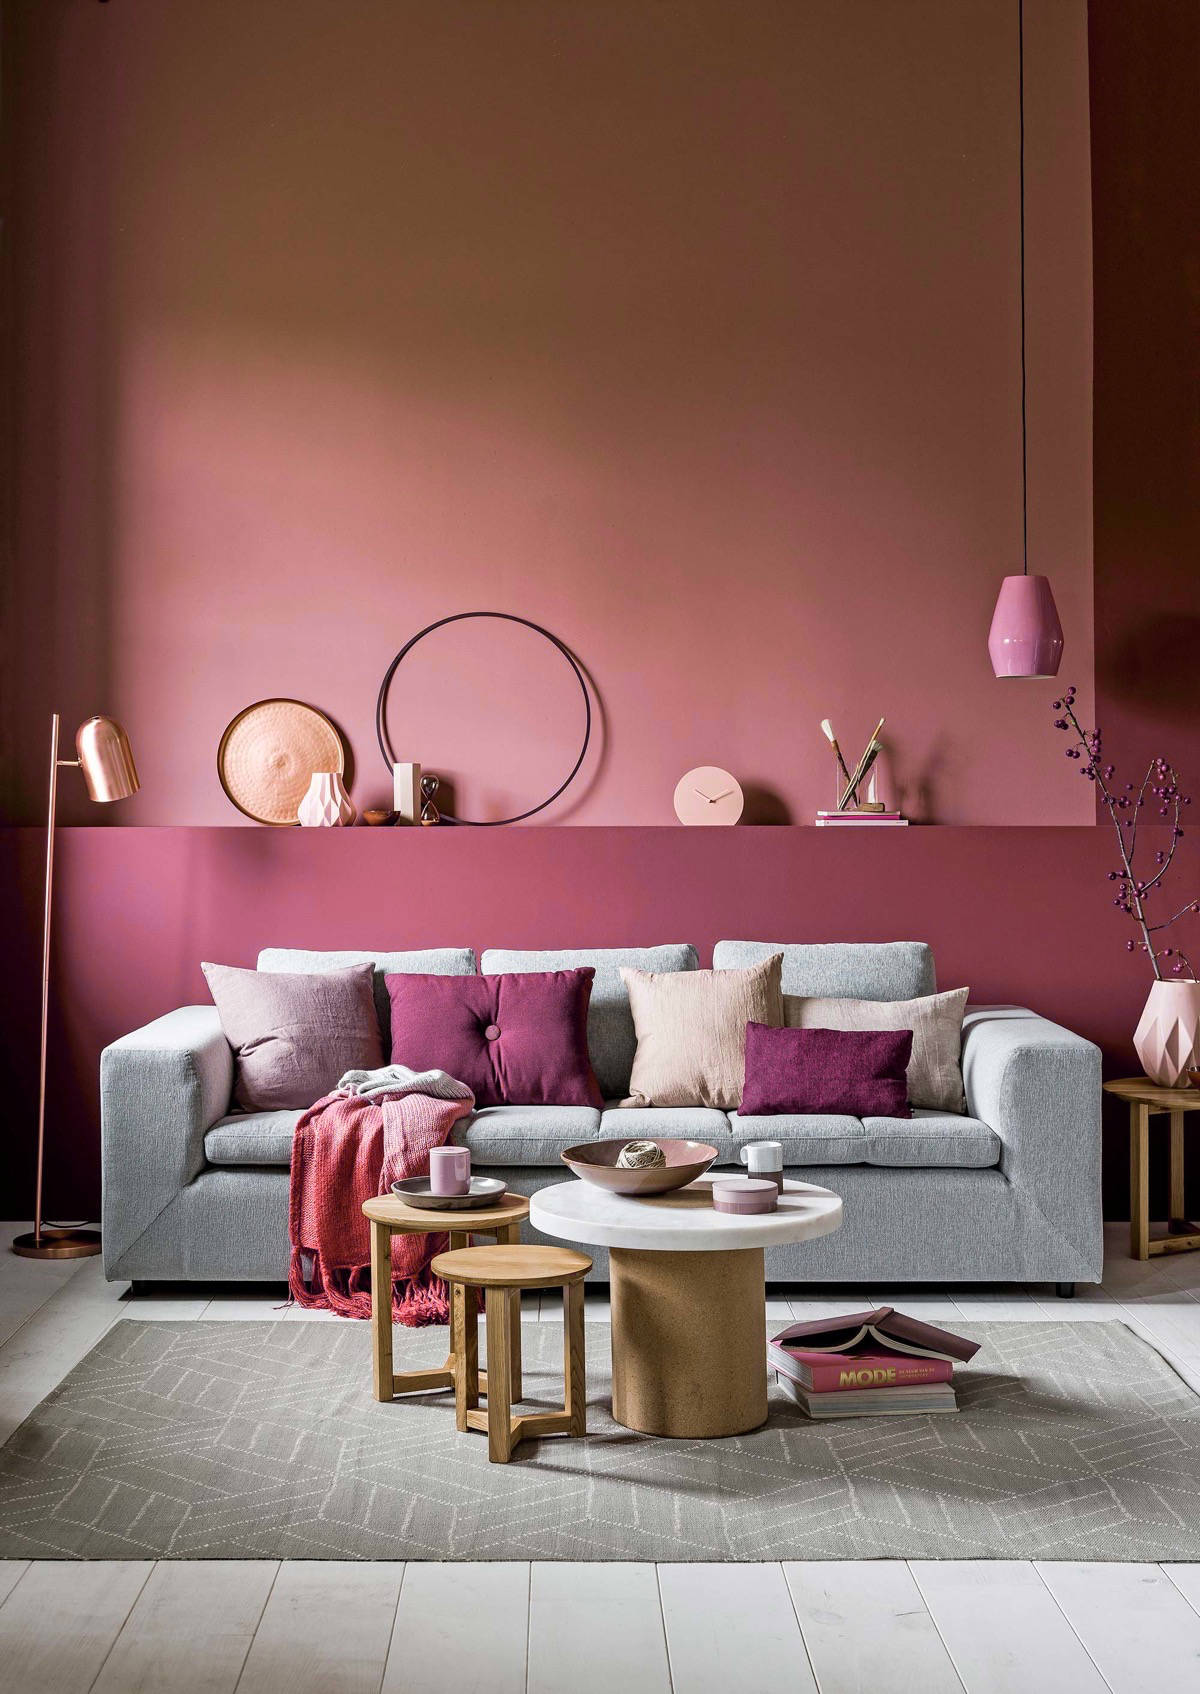 20 Classy and Cheerful Pink Living Rooms | Decoist